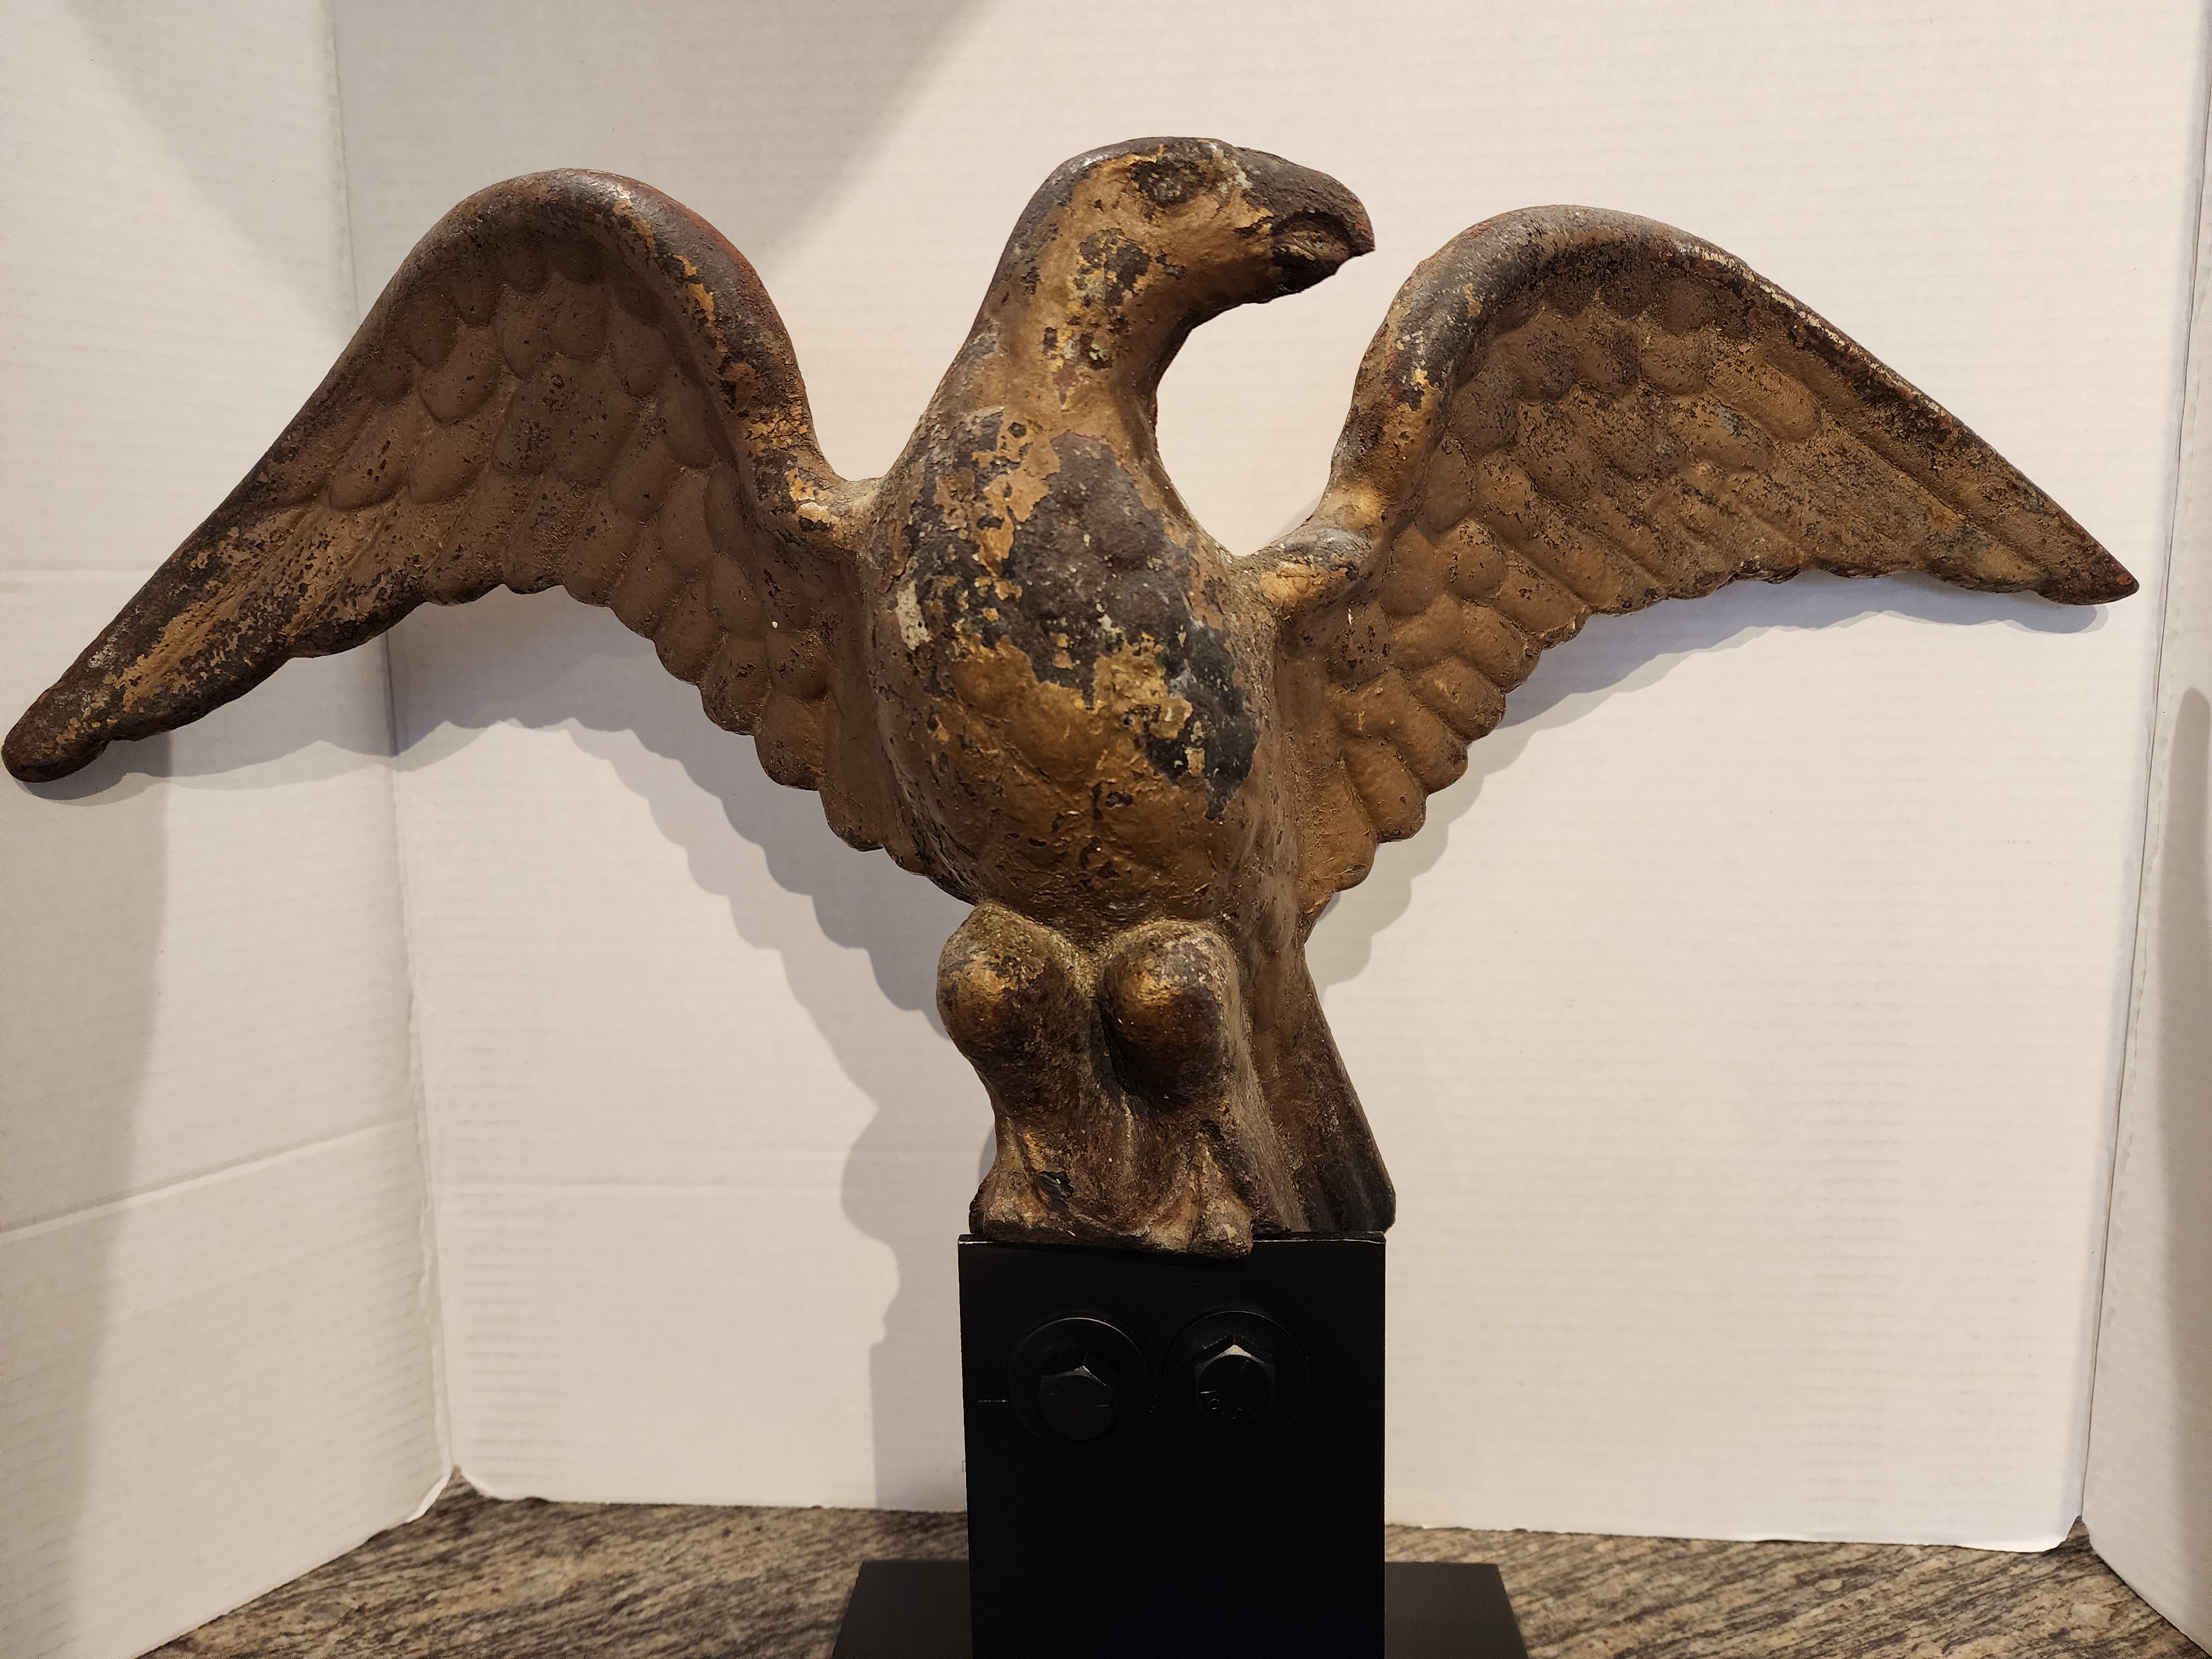 A CAST IRON EAGLE FINIAL IN OLD PAINT